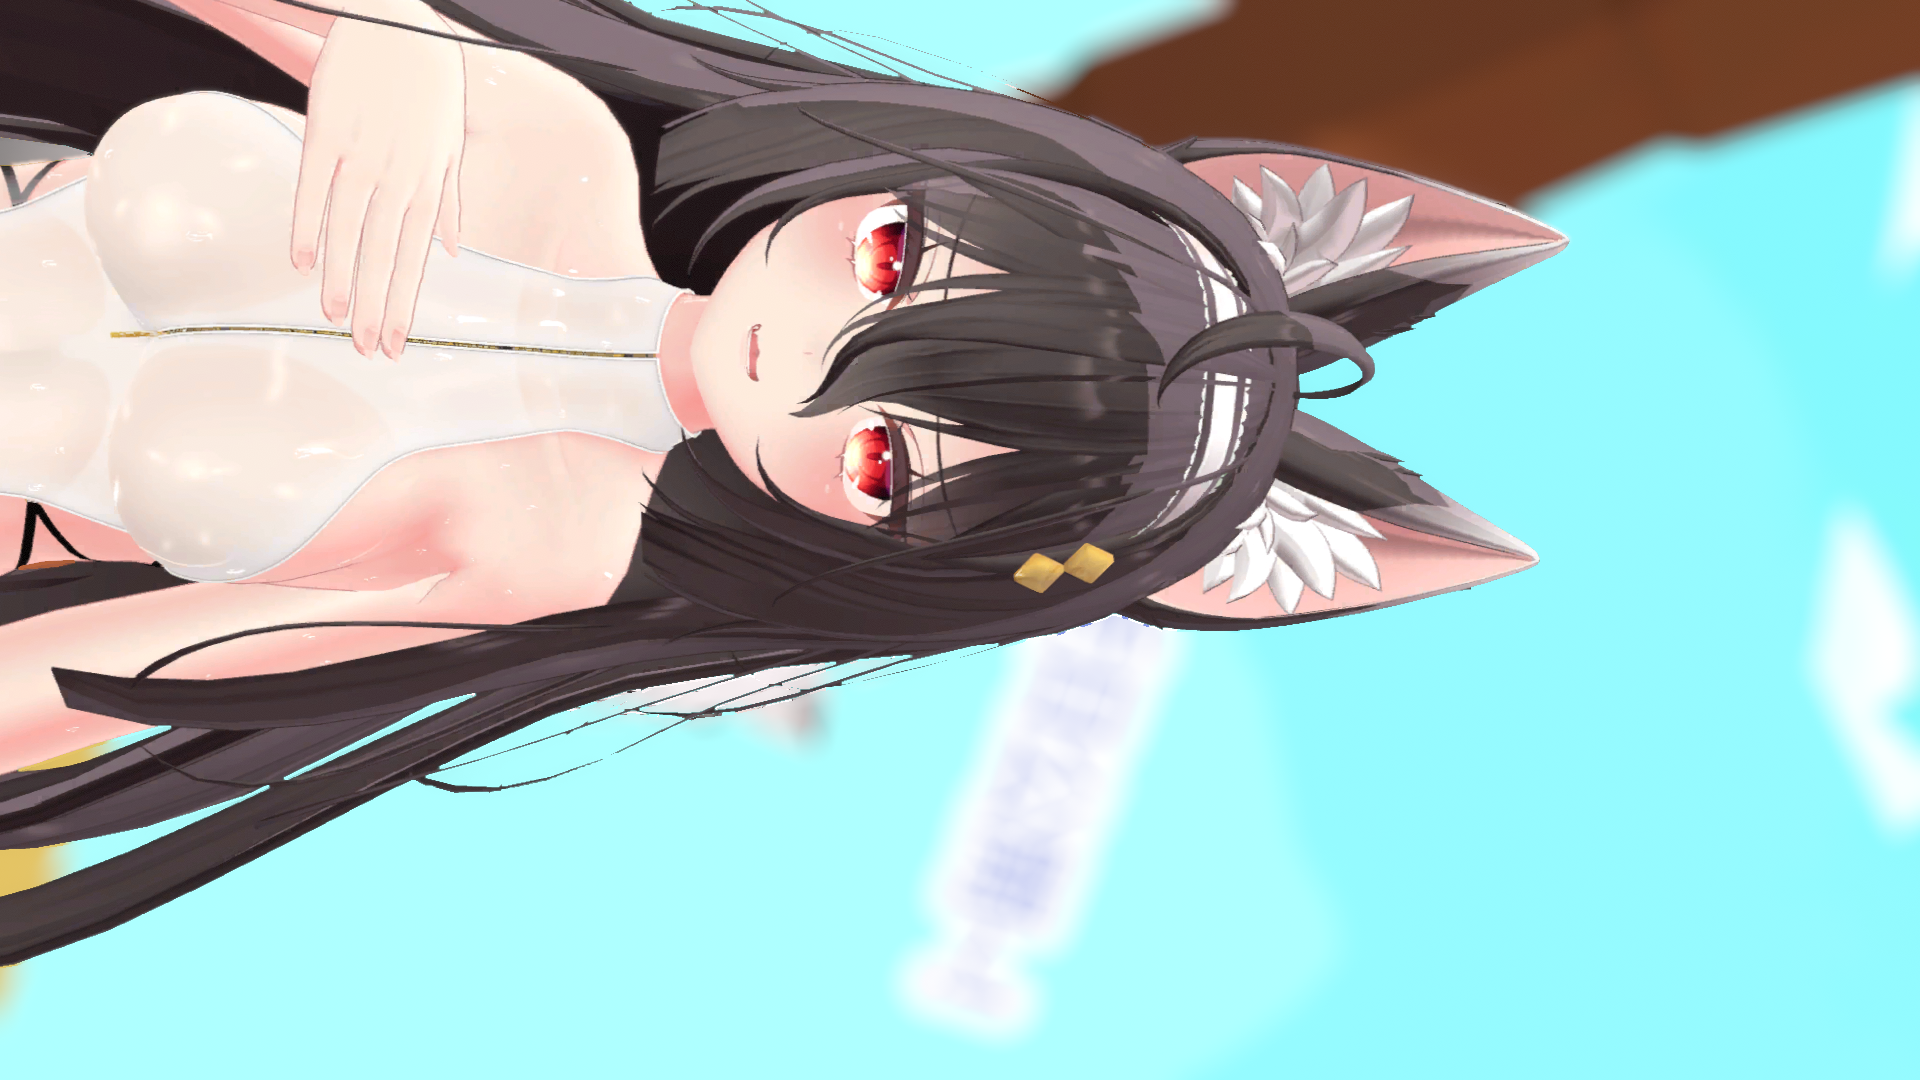 VRChat_1920x1080_2021-12-05_05-21-45.661.png